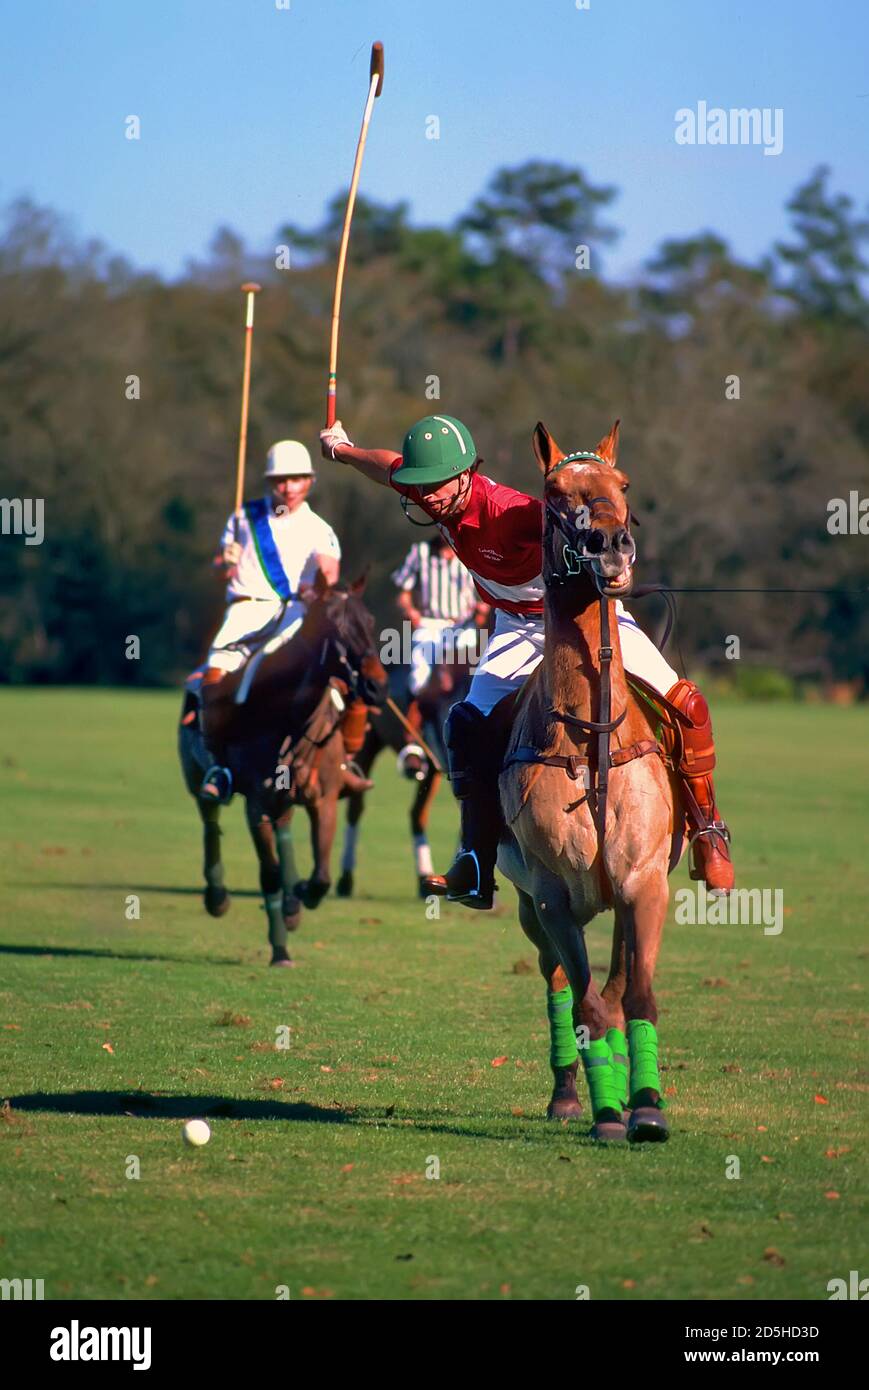 Polo match - Plant City - Florida Polo, game played on horseback between  two teams of four players each who use mallets with long, flexible handles  t Stock Photo - Alamy